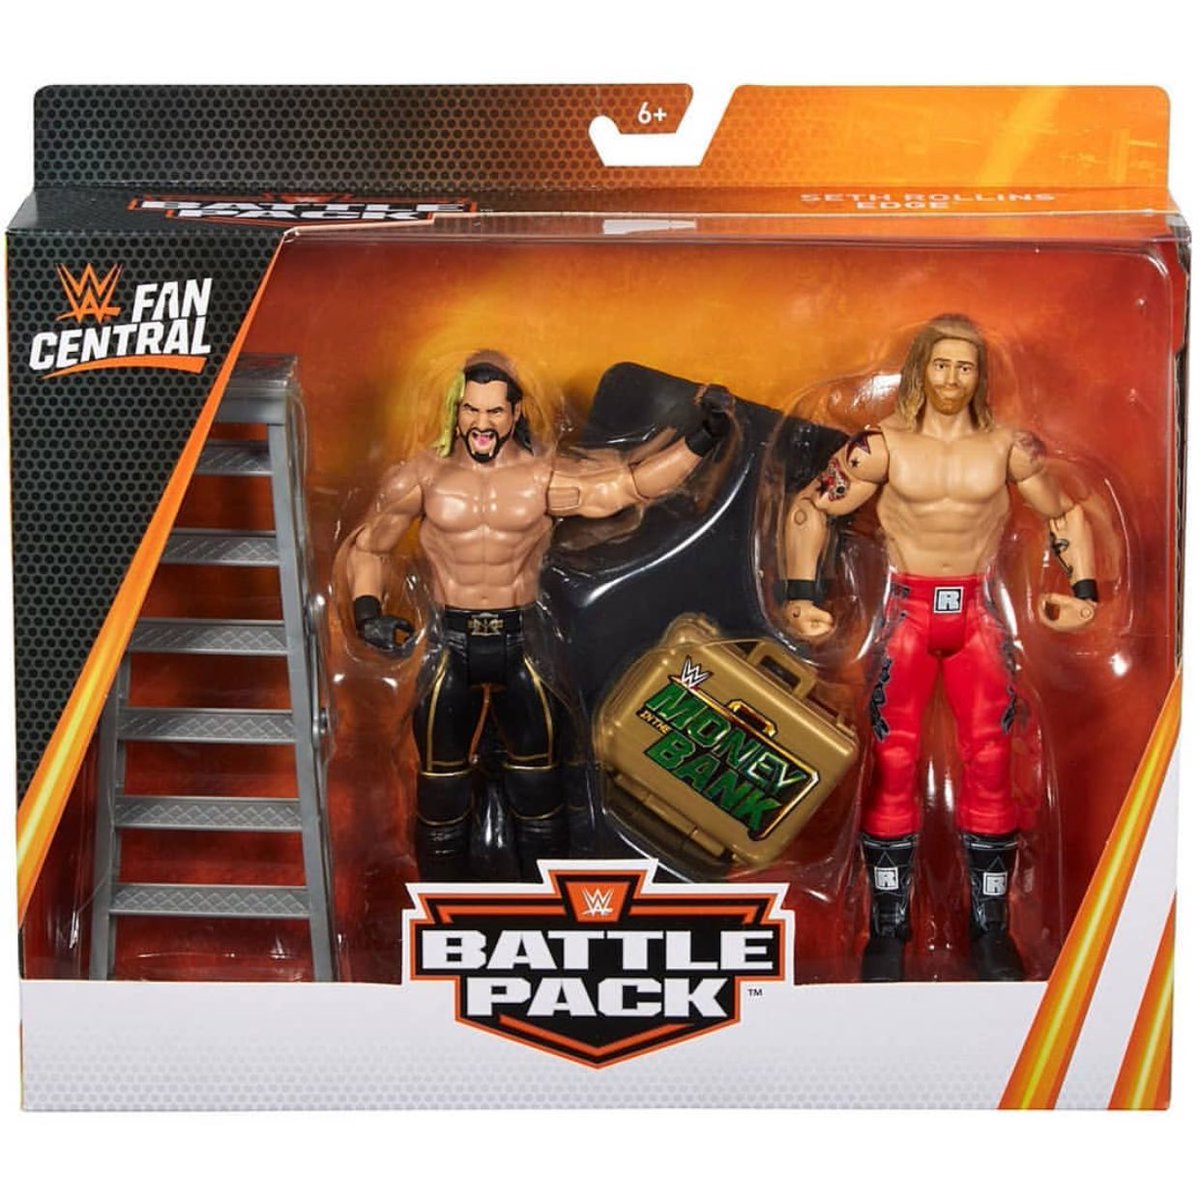 Wrestling Figure News Source On Twitter Wwe Fan Central Battle Packs These Will Be At Walmart